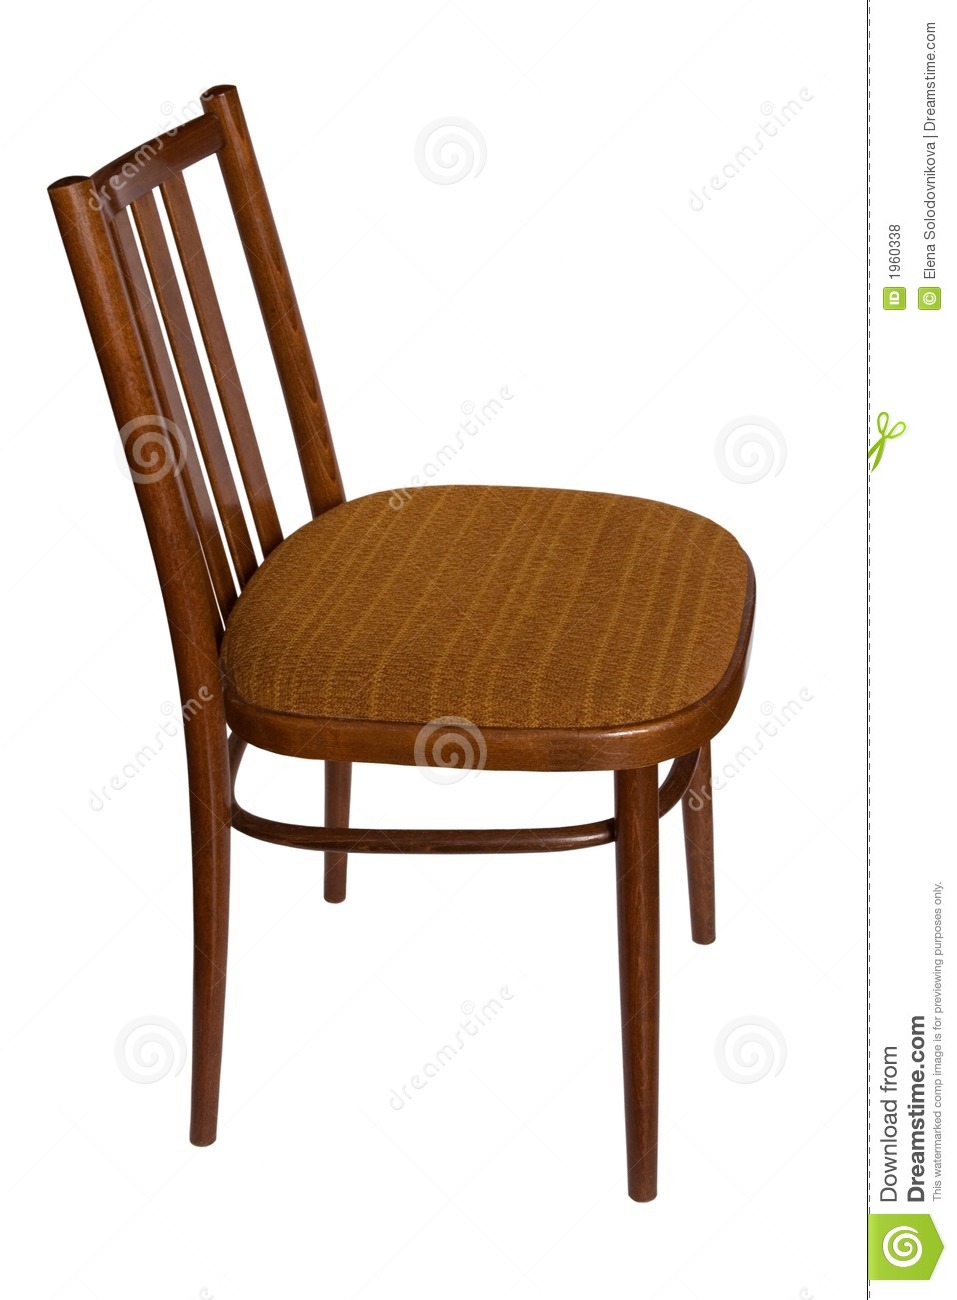 Ordinary Chair Side View  Royalty Free Stock Photos   Image  1960338